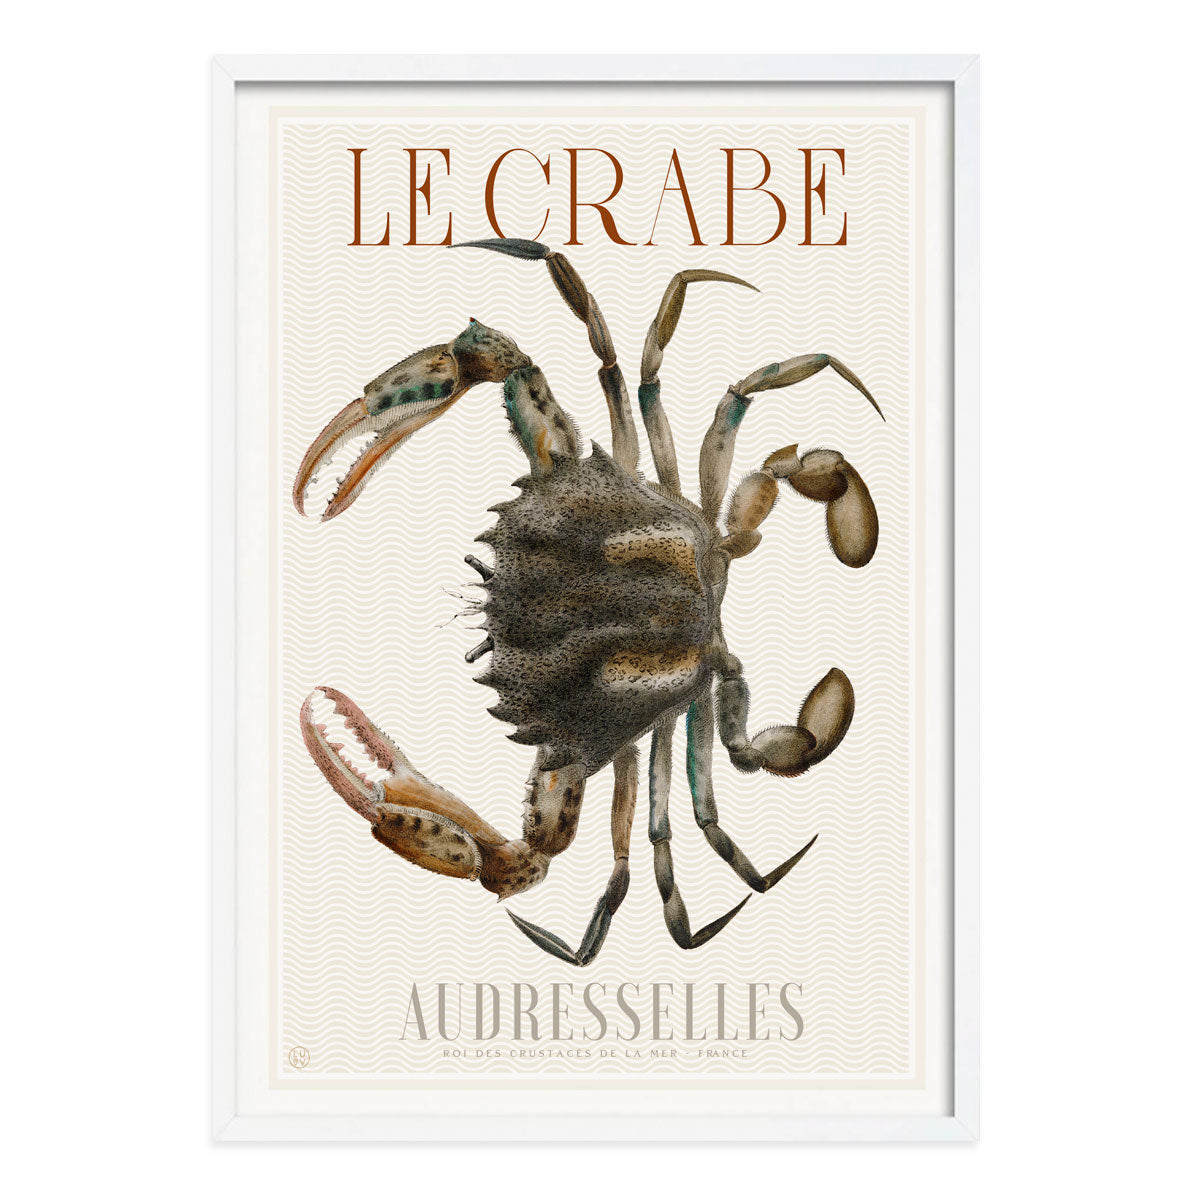 French Crab retro vintage poster print in white frame from Places We Luv